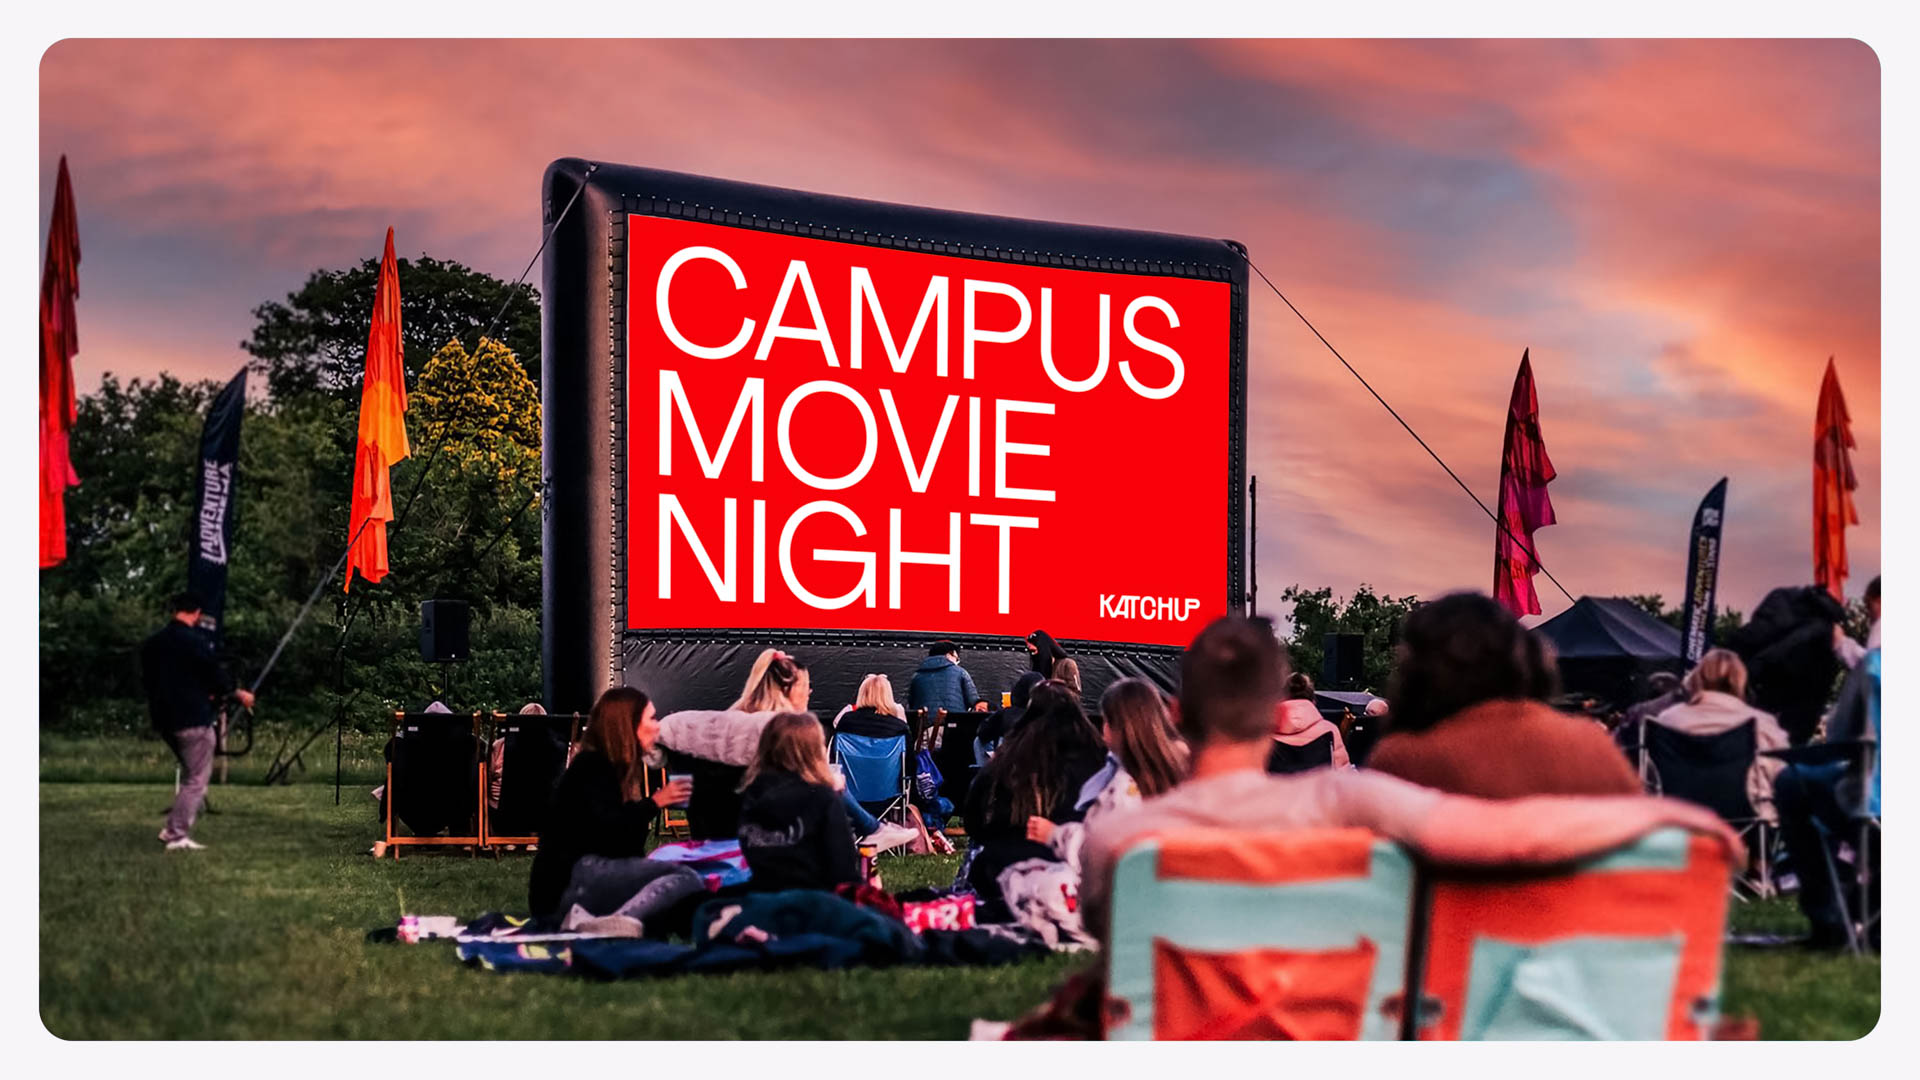 people sitting on the grass, with a temporary movie screen in front of them